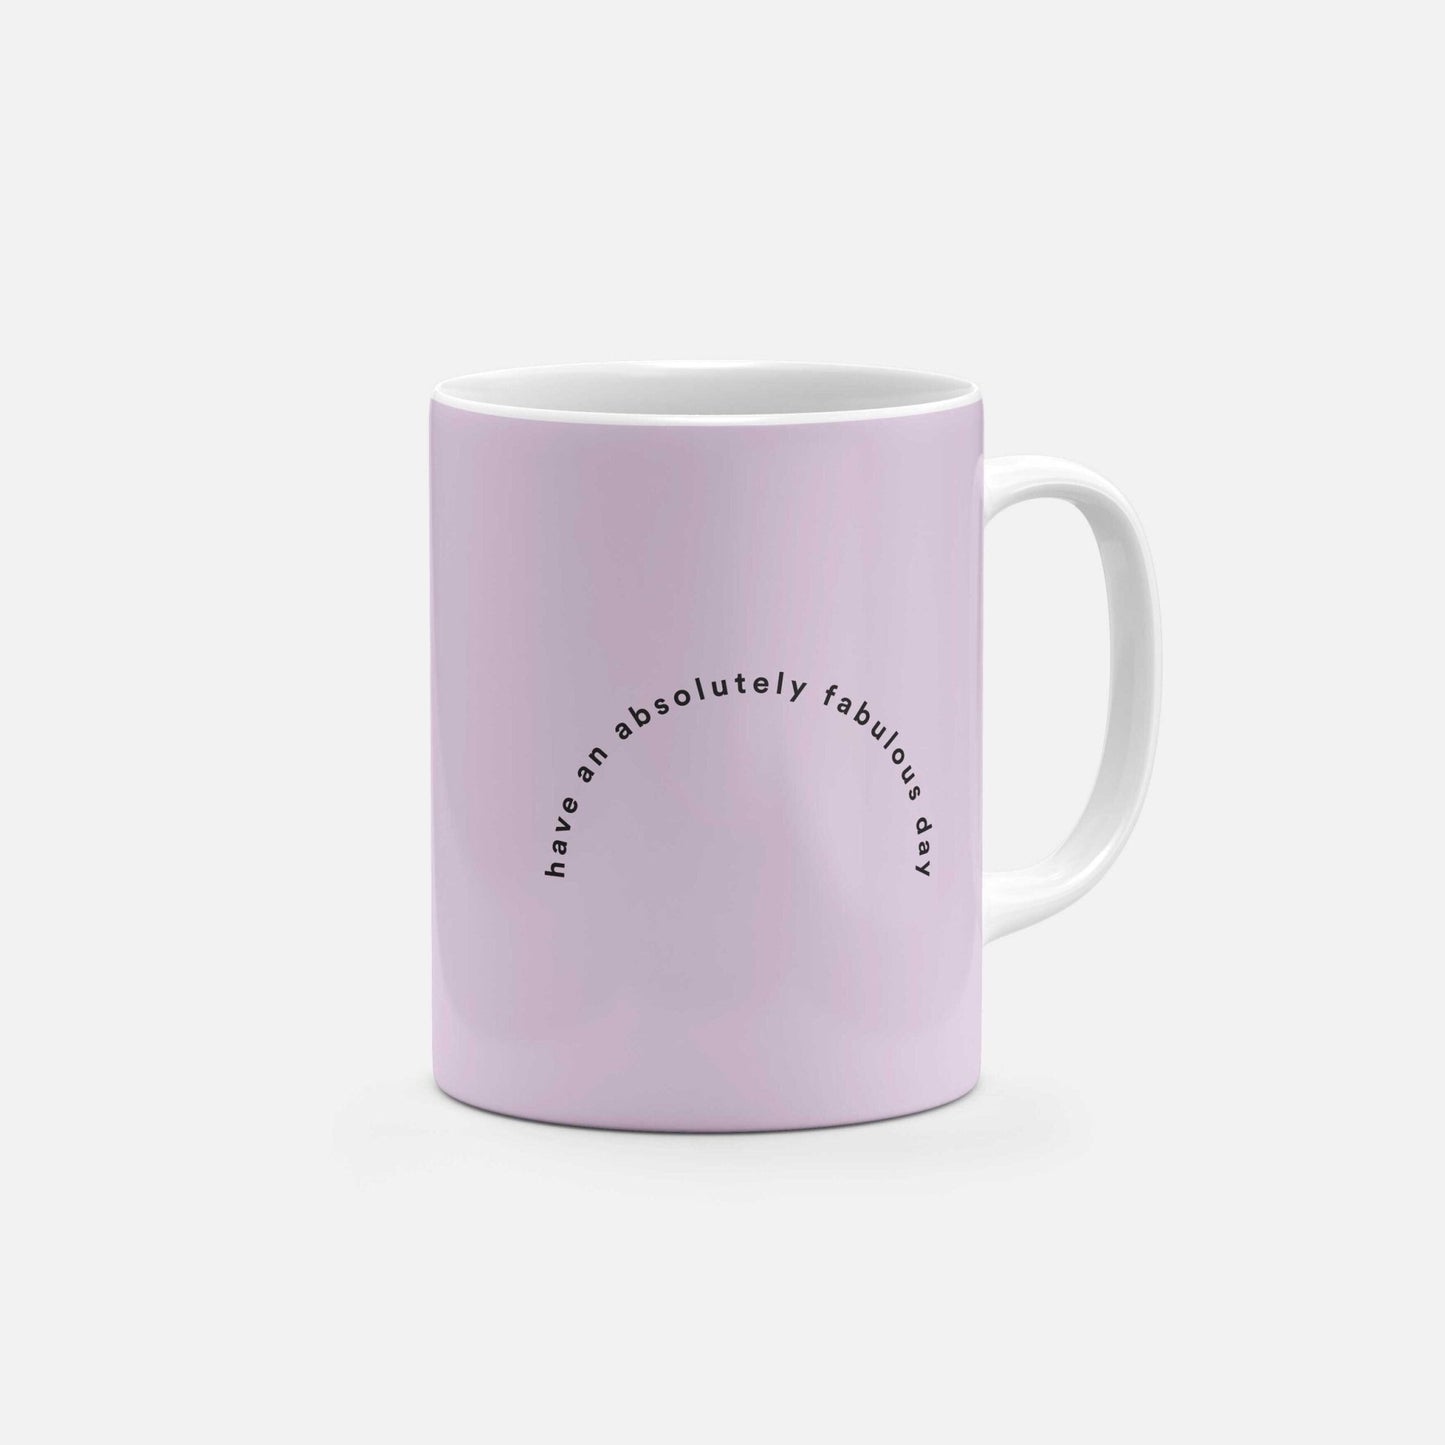 Have an Absolutely Fabulous Day 11 Oz Mug IV The Design Craft